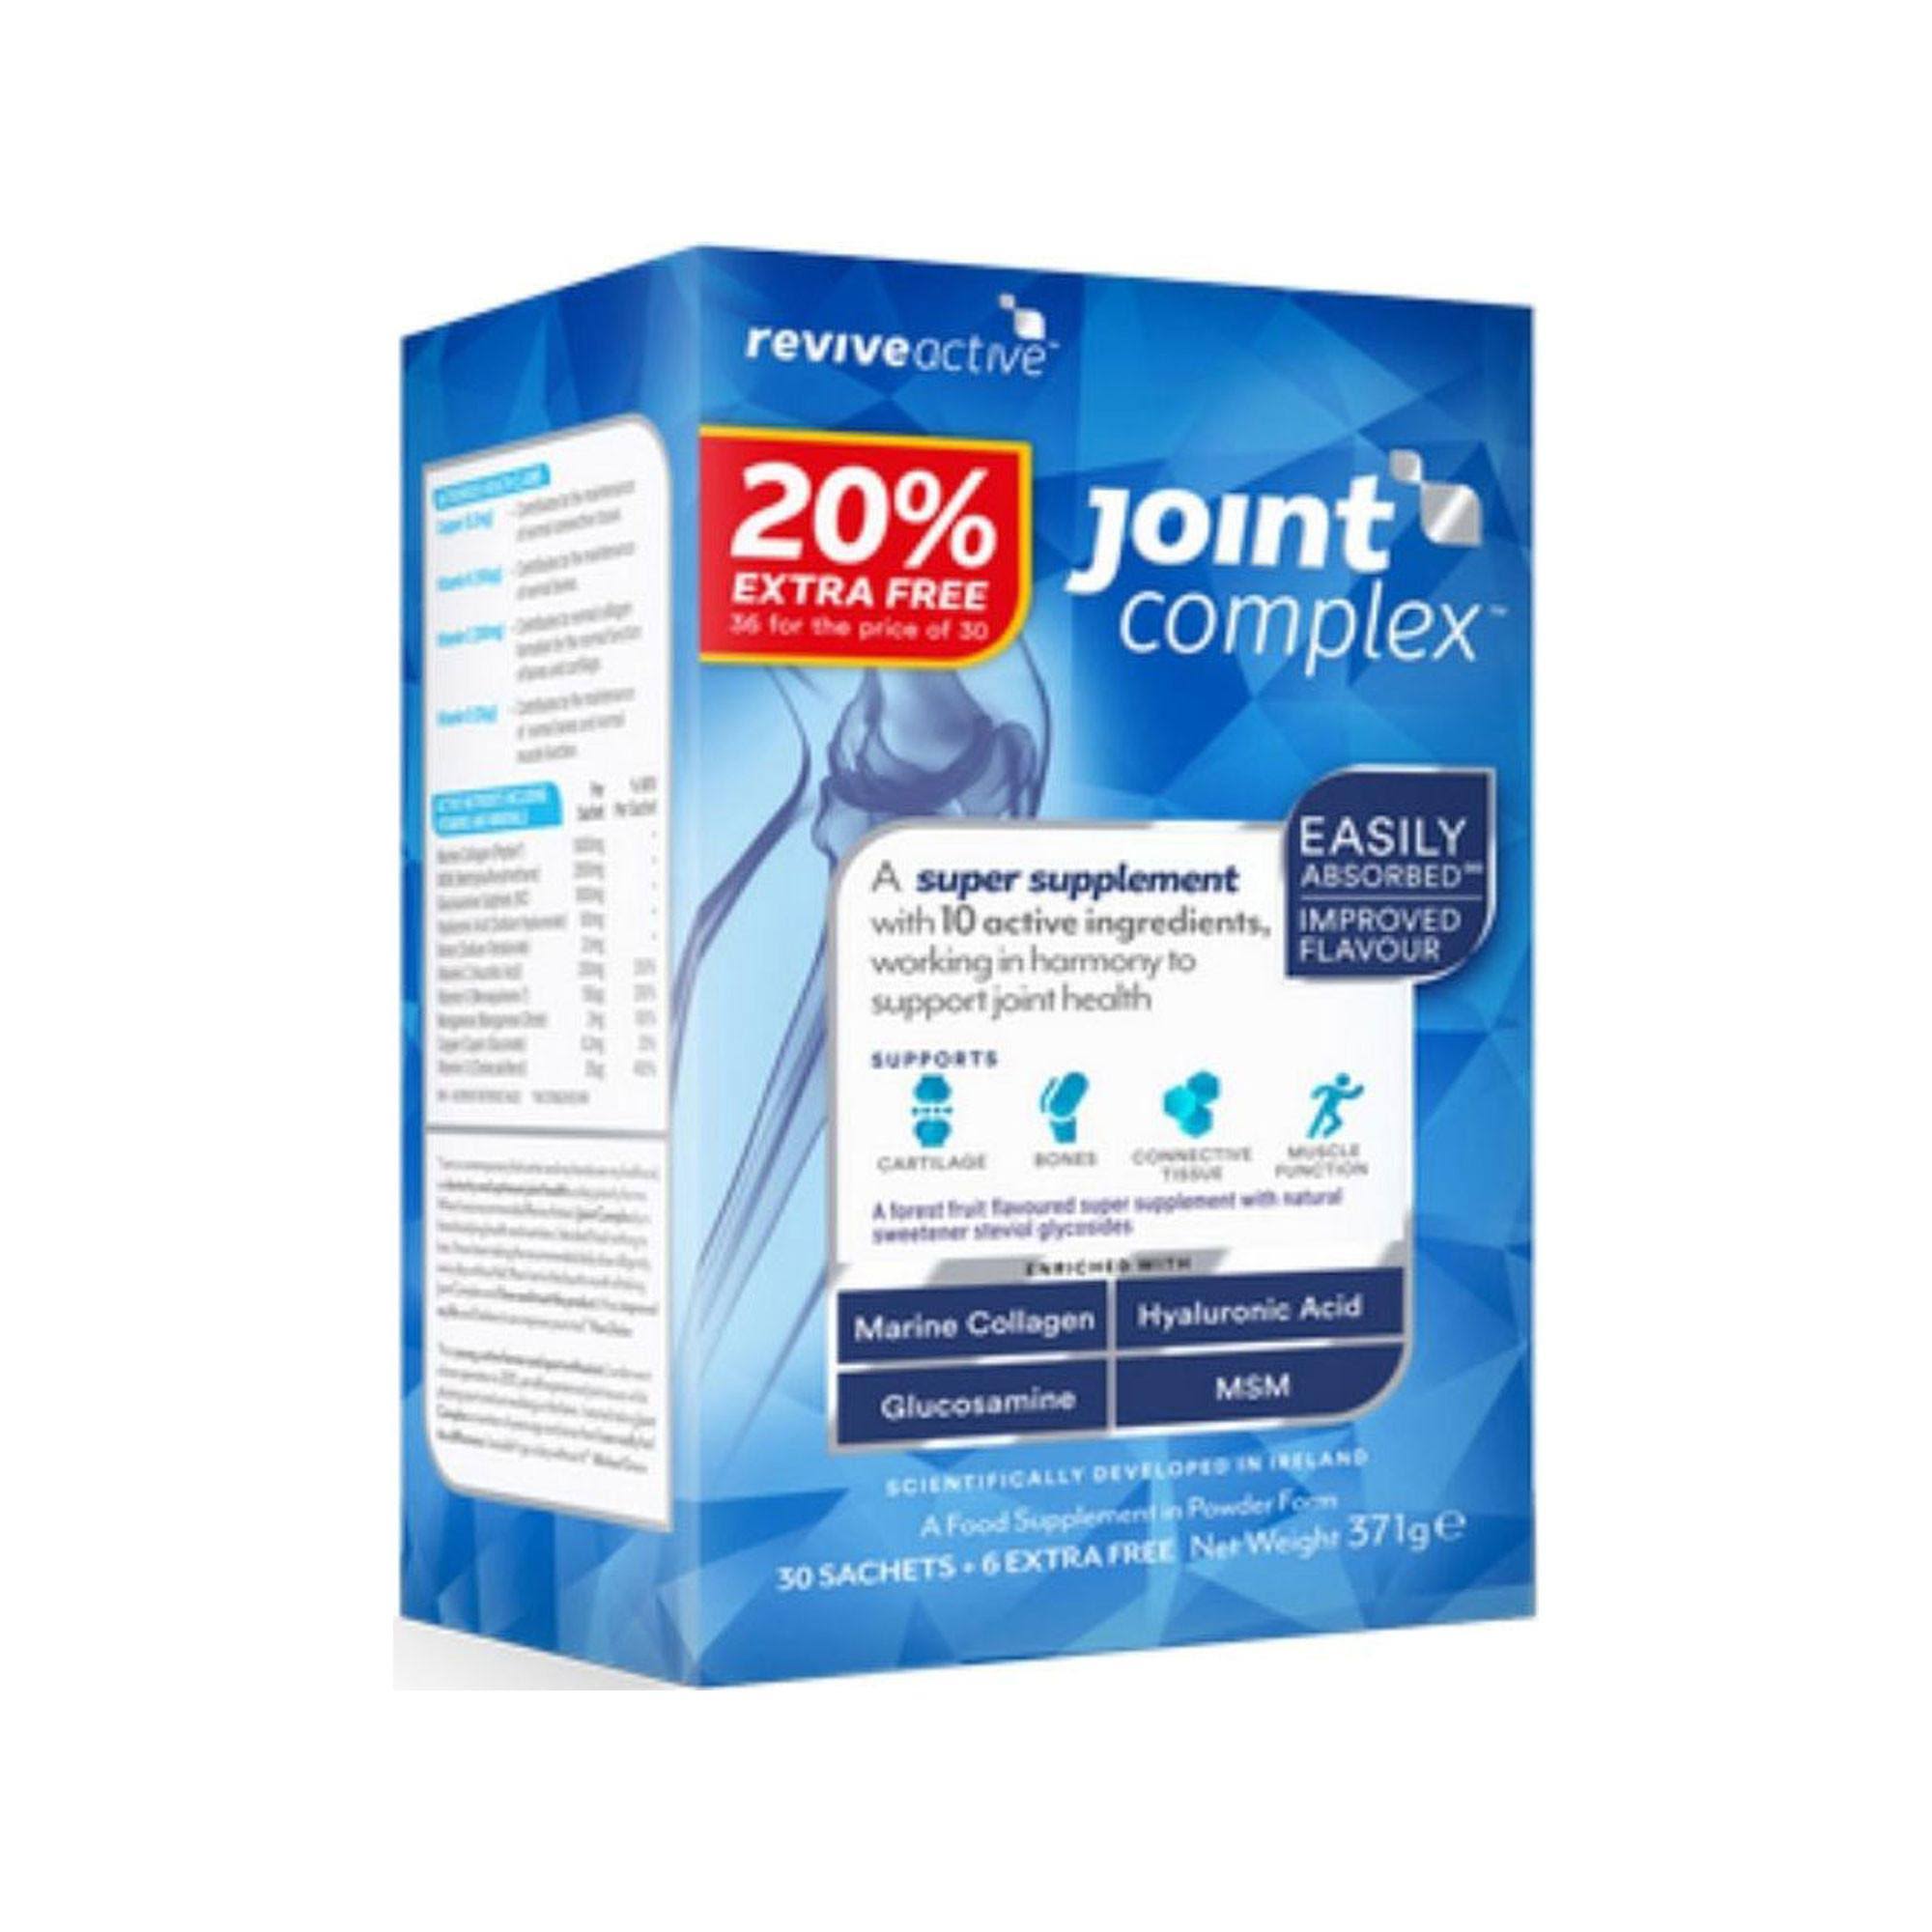 Revive Active Active Joint Complex 20% Extra